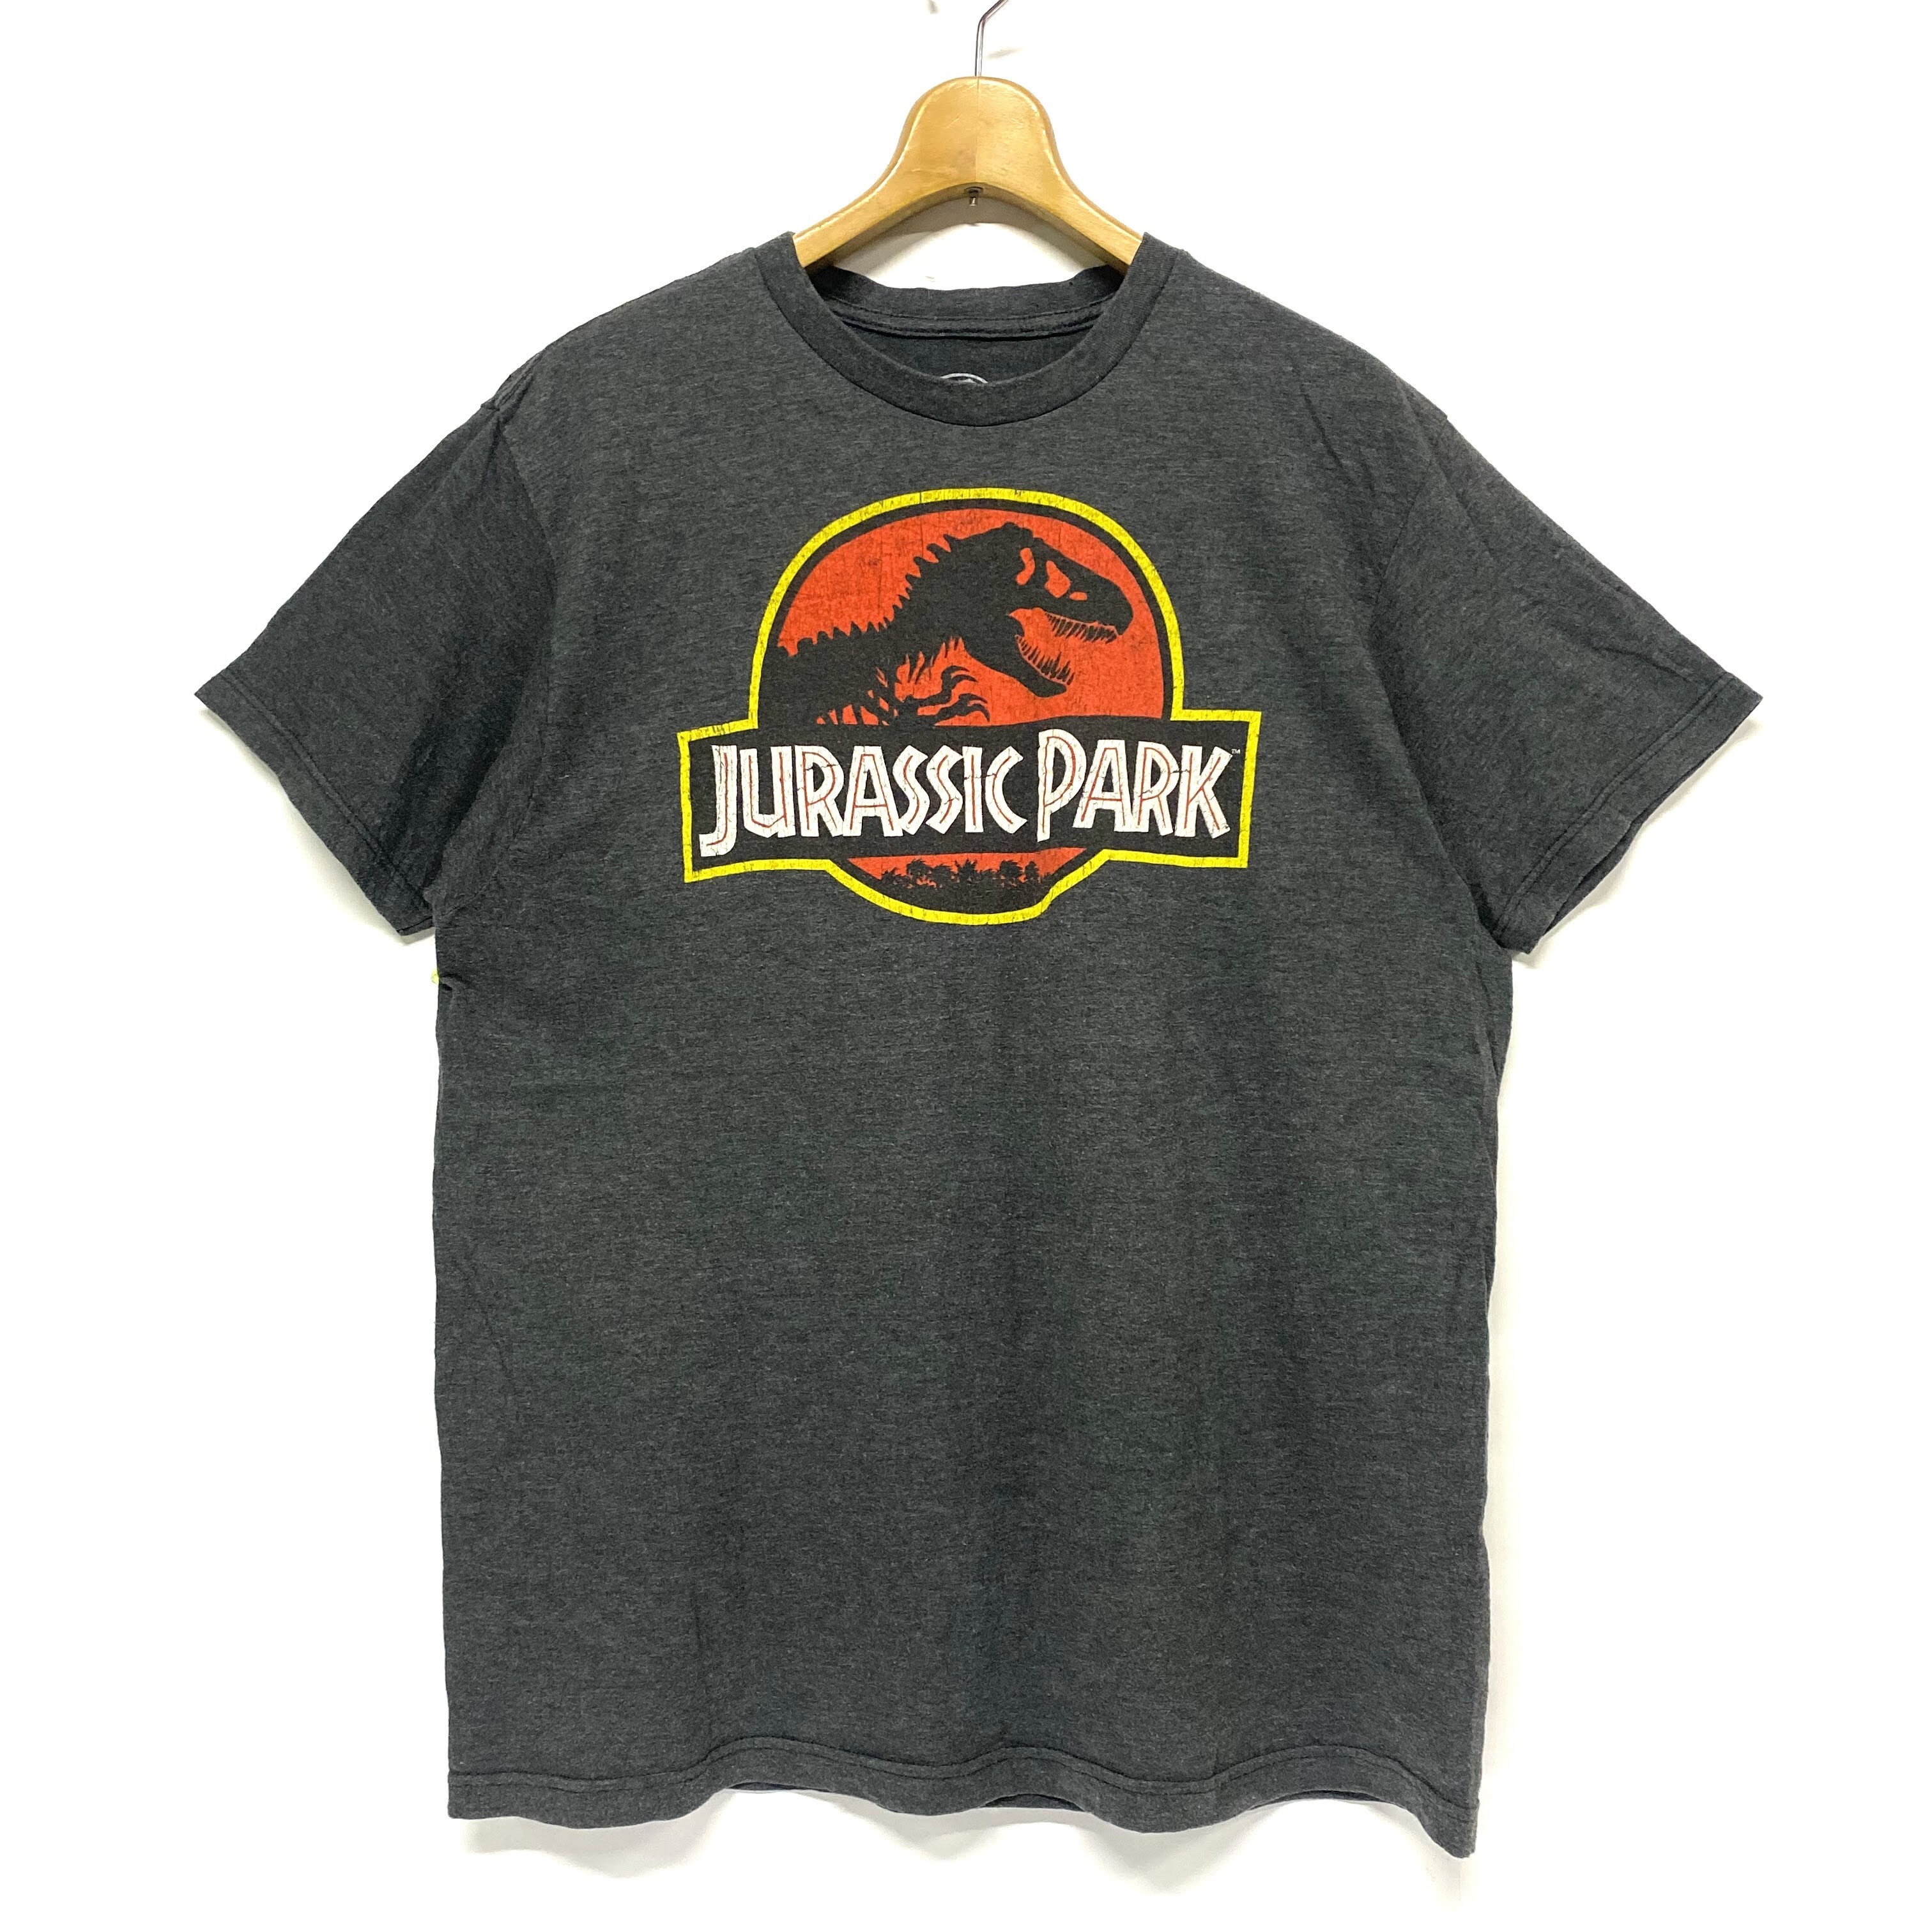 Jurassic Park ジュラシックパーク プリントtシャツ ムービーtシャツ メンズl 古着 Tシャツ Cave 古着屋 公式 古着通販サイト